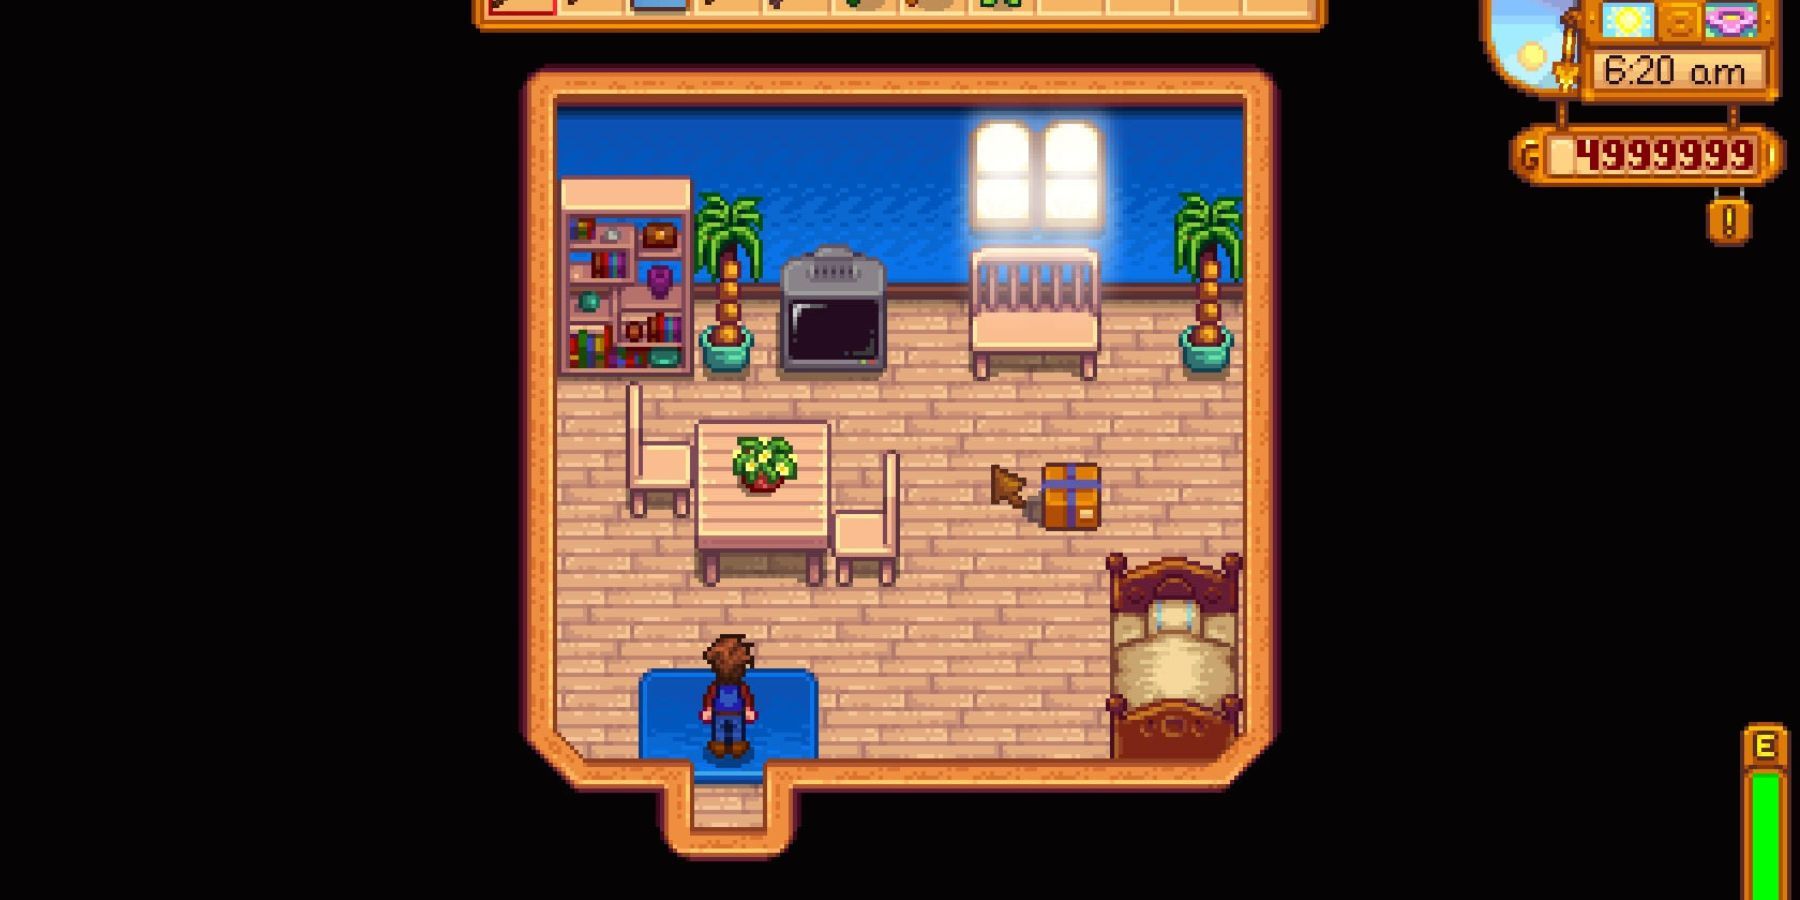 Basic layout of the farm in Stardew Valley